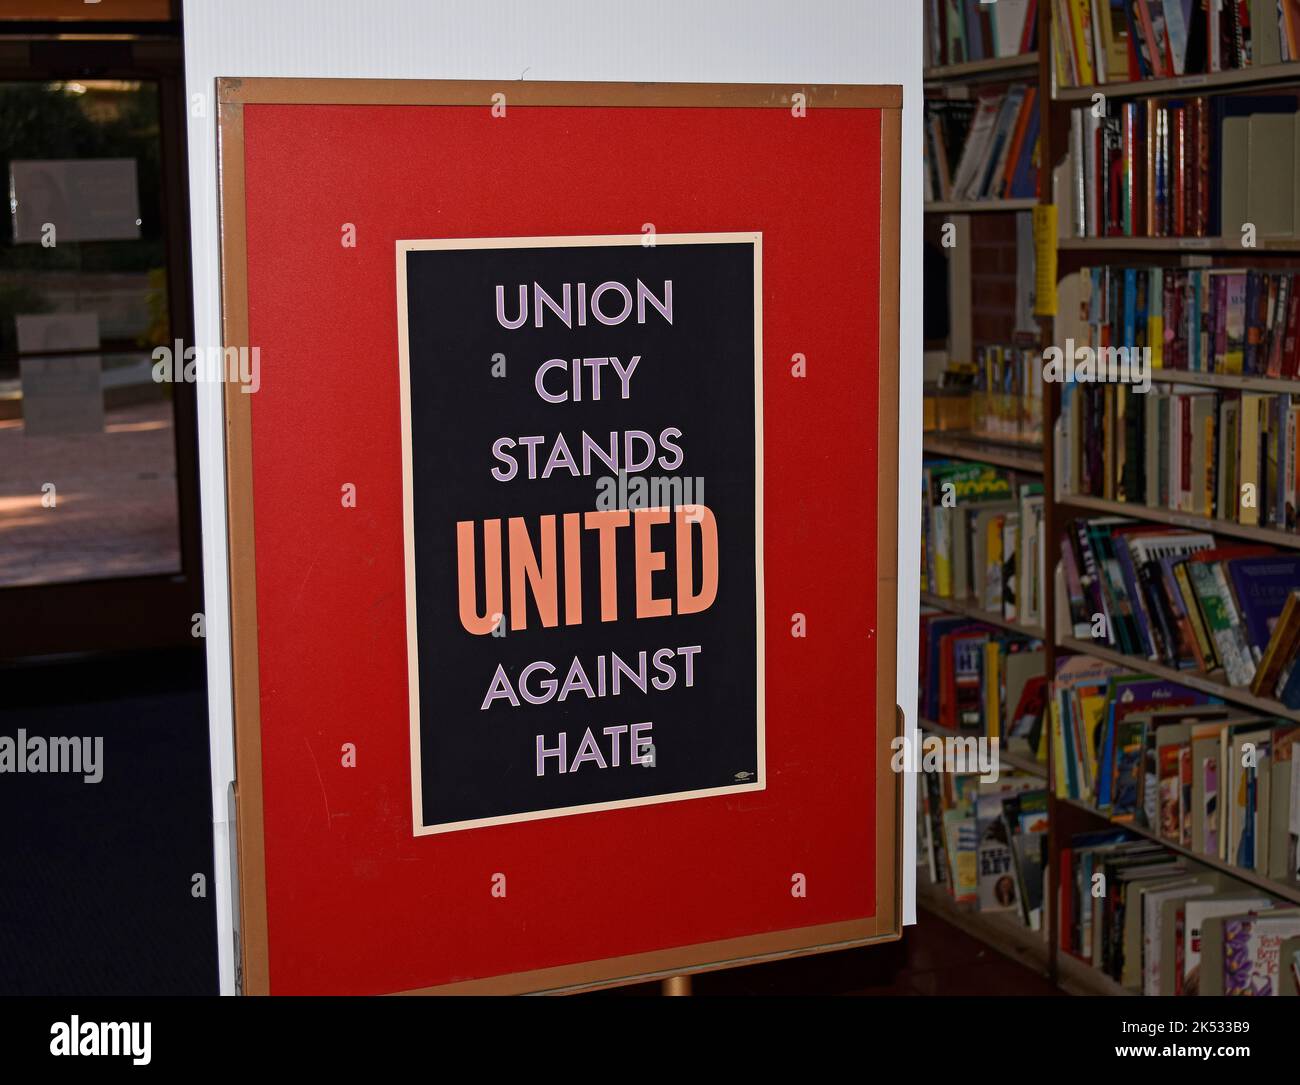 Union City stands against Hate sign in the Union City, California Public Library Stock Photo